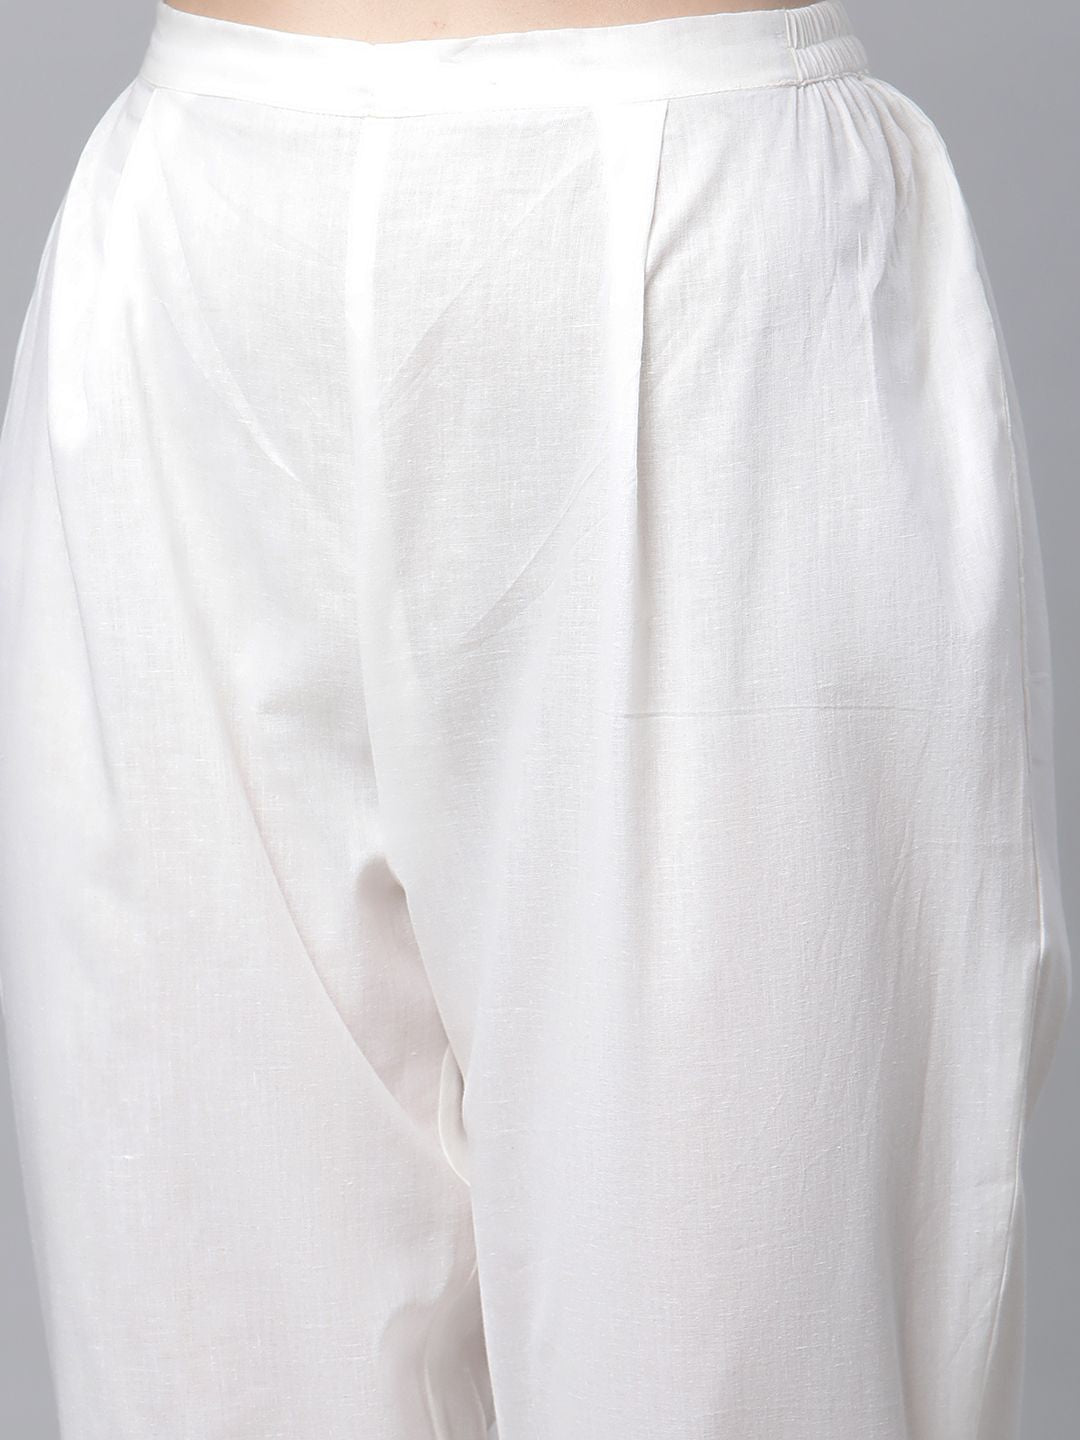 Off White Pure Cotton Printed Kurta with Trousers